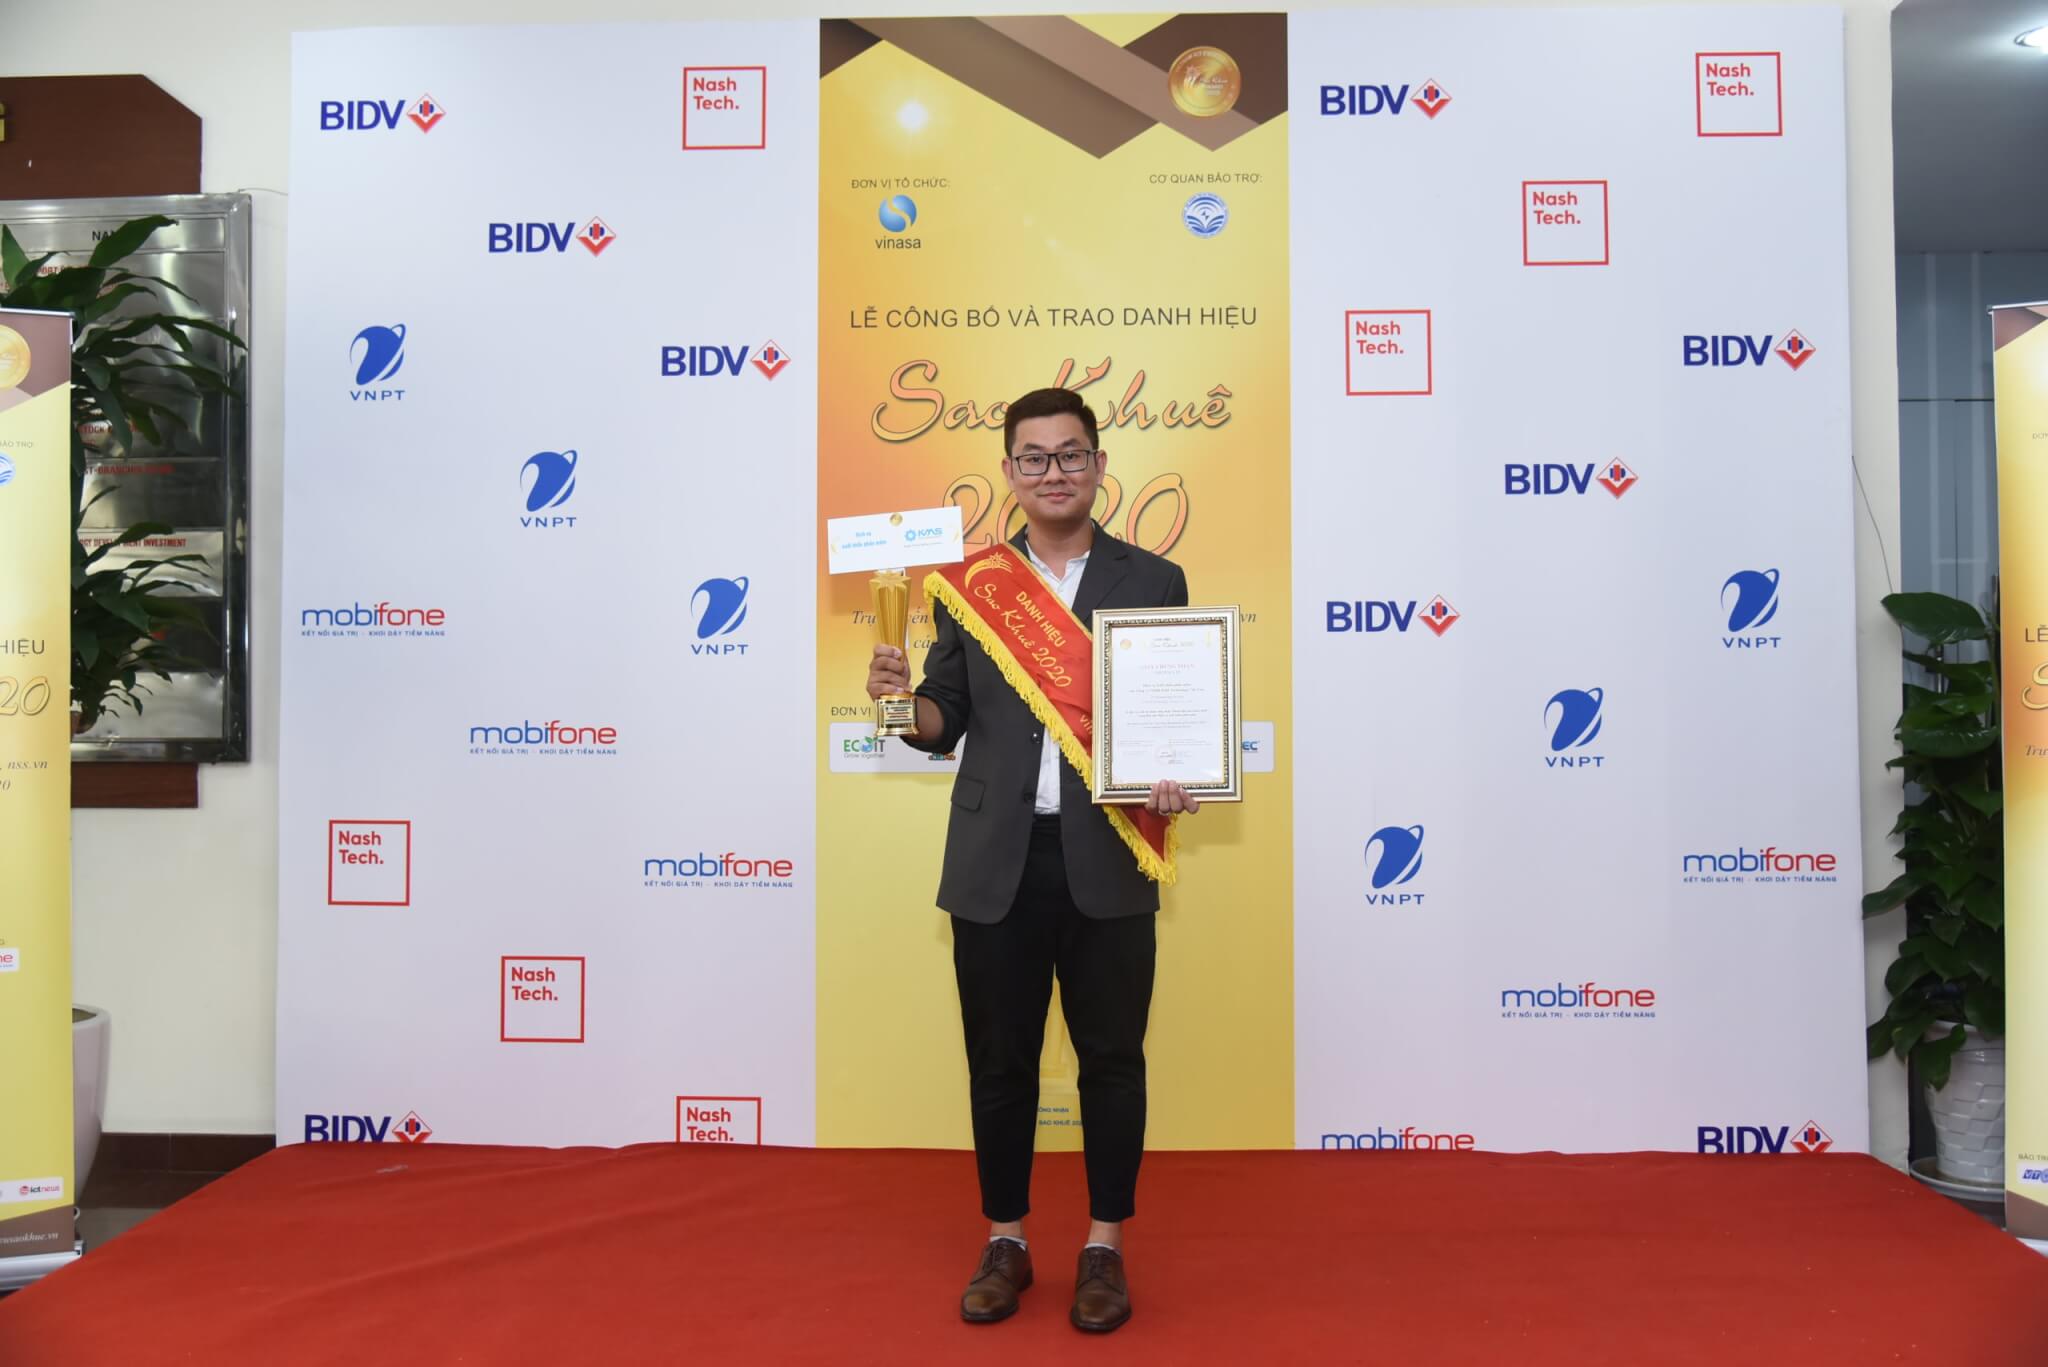 KMS Technology receives Sao Khue award 2020 for its software outsourcing service for the ninth consecutive year